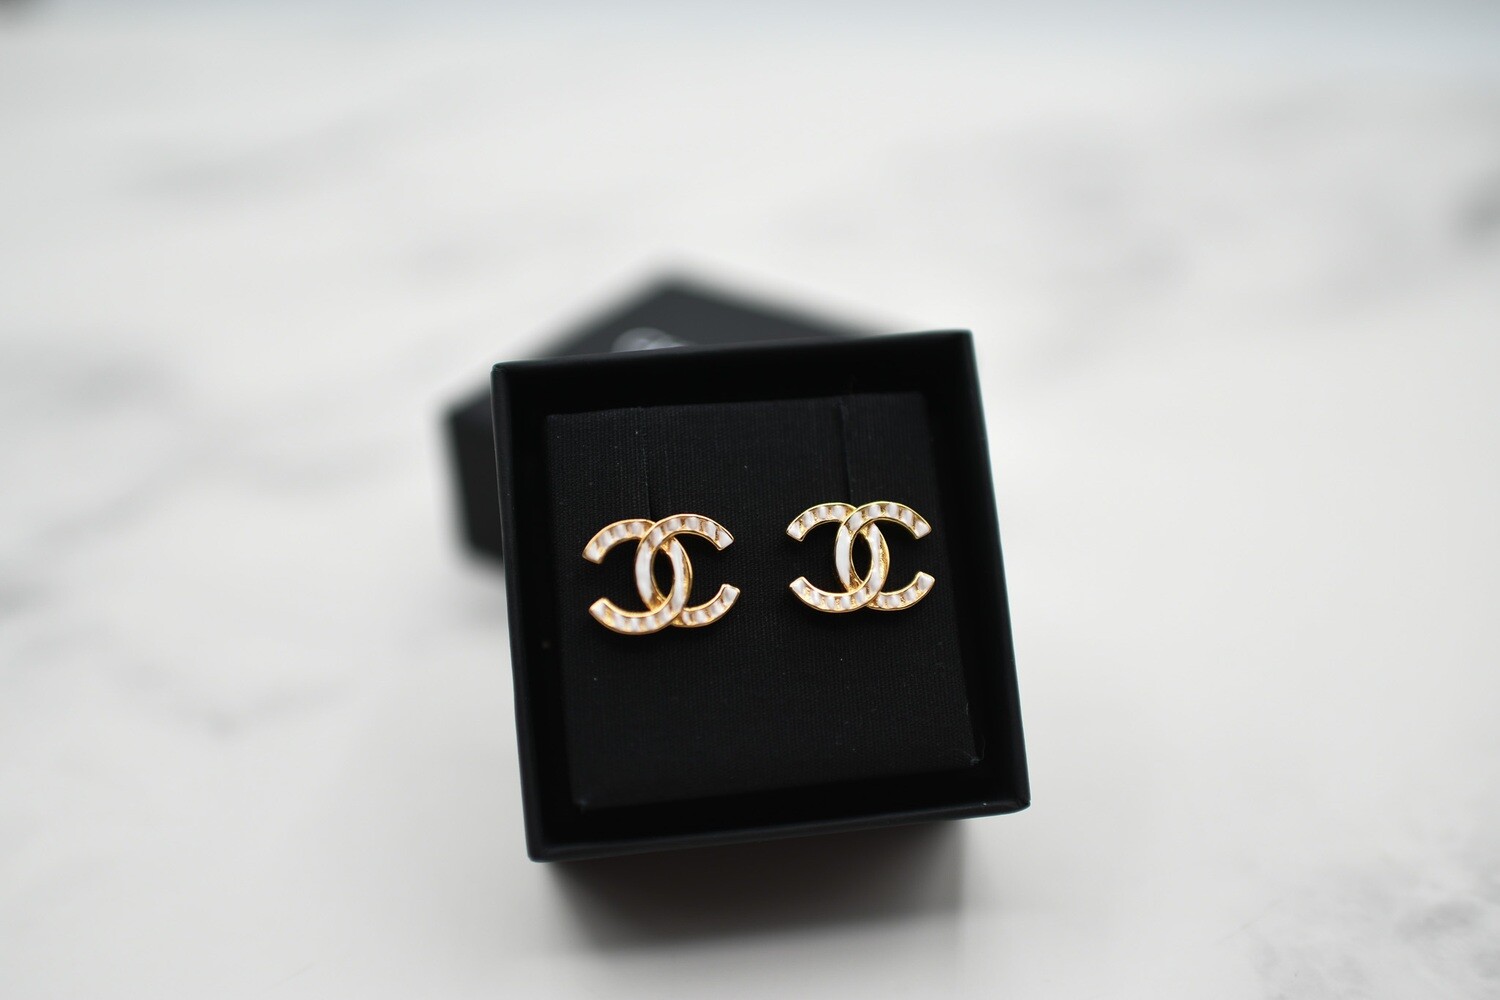 Chanel Earrings CC White and Golden Stripe Studs (No Stone), Gold